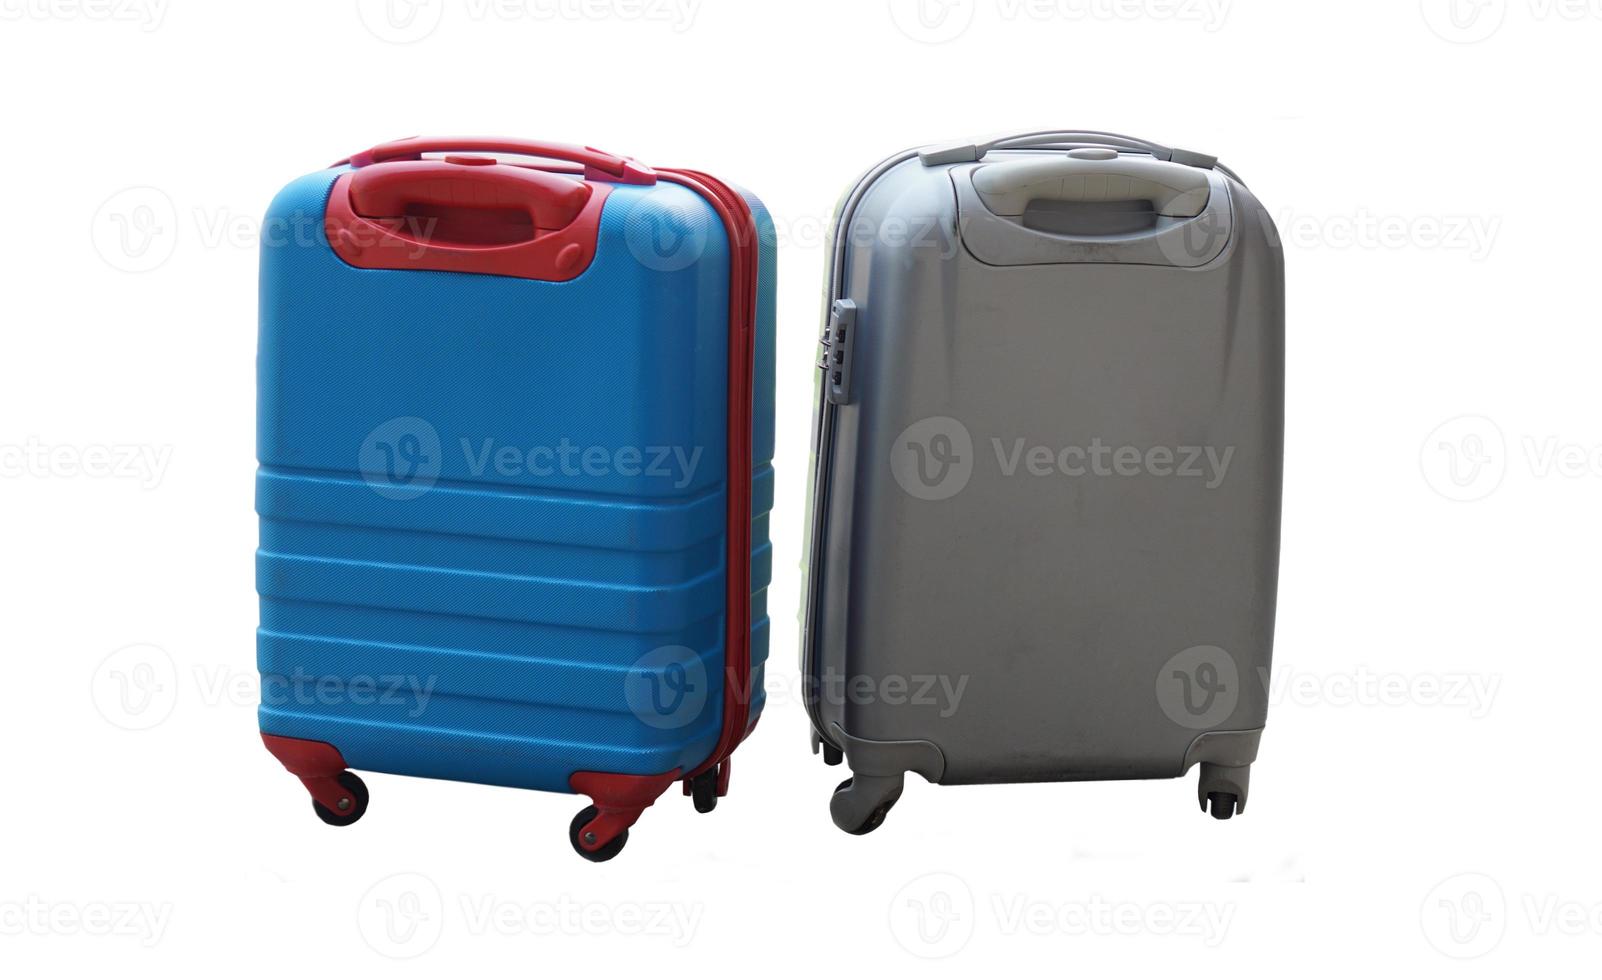 Wheeled luggage. Baggage. Trolley travel bags. Suitcase bags for travelling. White background. Concept, equipment for keep things for travelling, trip, tour, journey. photo